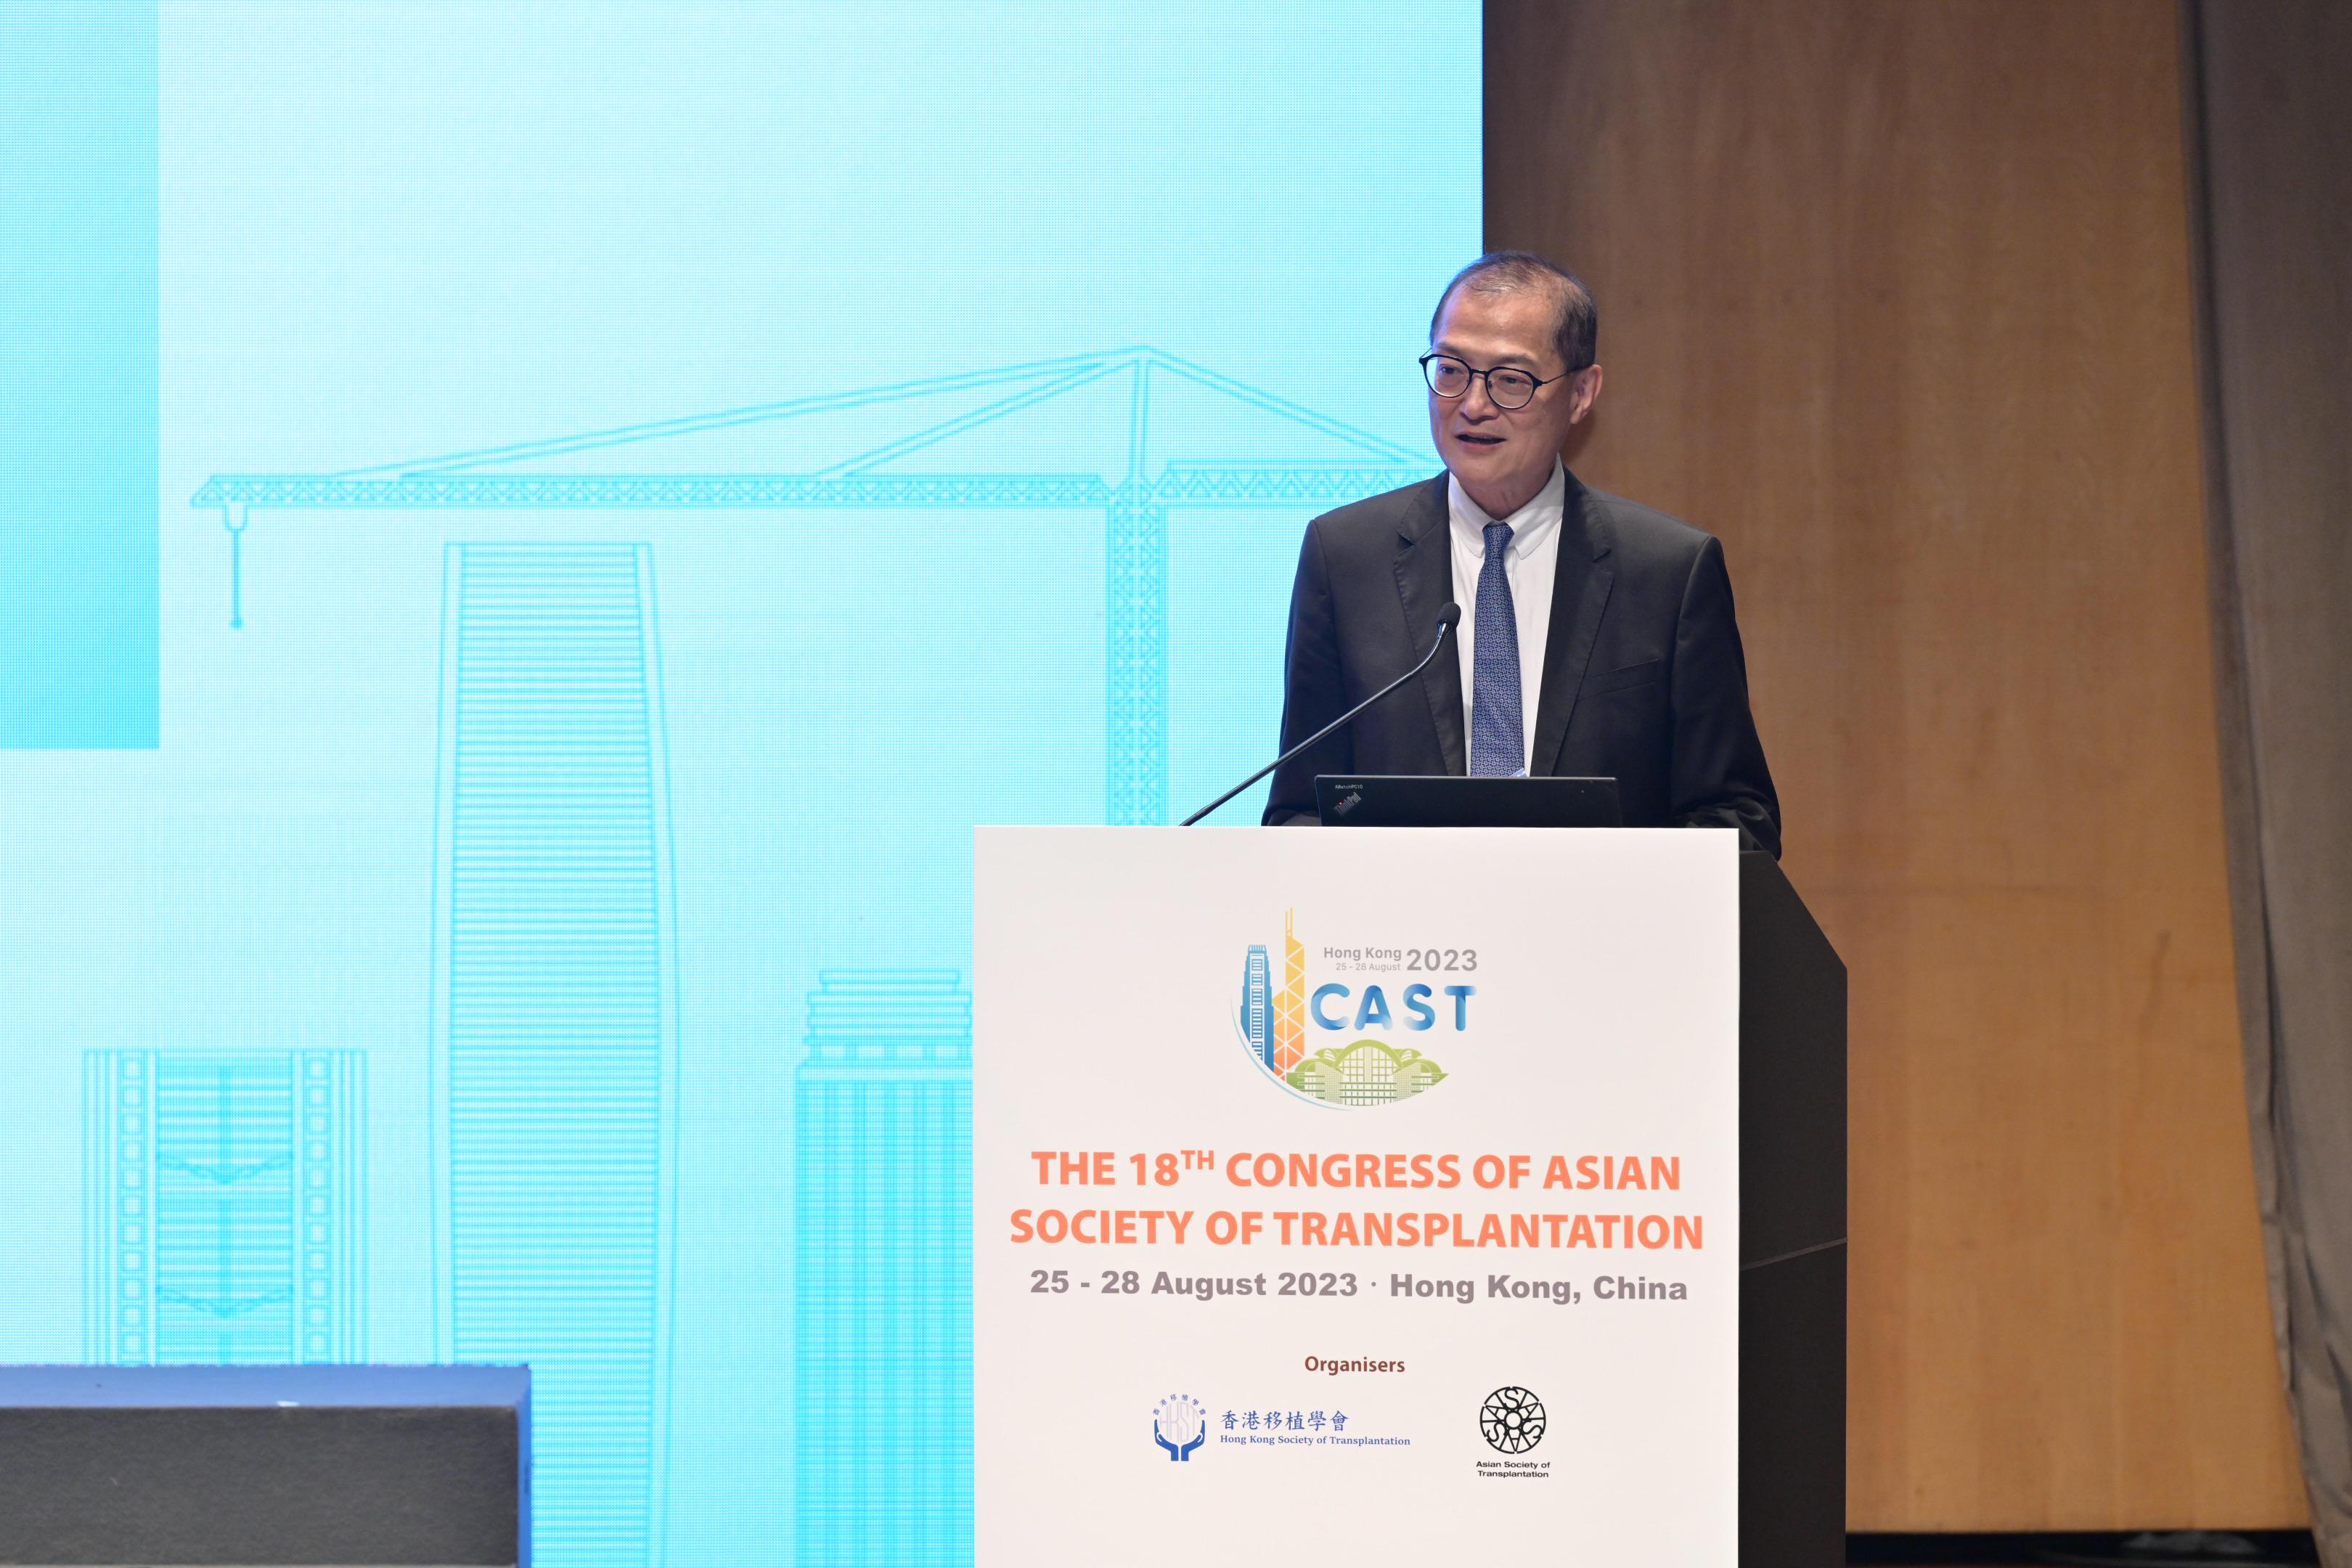 In his remarks at the opening ceremony of the 18th Congress of Asian Society of Transplantation today (August 25), the Secretary for Health, Professor Lo Chung-mau, pointed out that it is essential for every society to raise awareness about organ donation, and that the Hong Kong Special Administrative Region Government is actively exploring the setting-up of a standing second-tier mutual assistance mechanism for organ transplant with the Mainland.